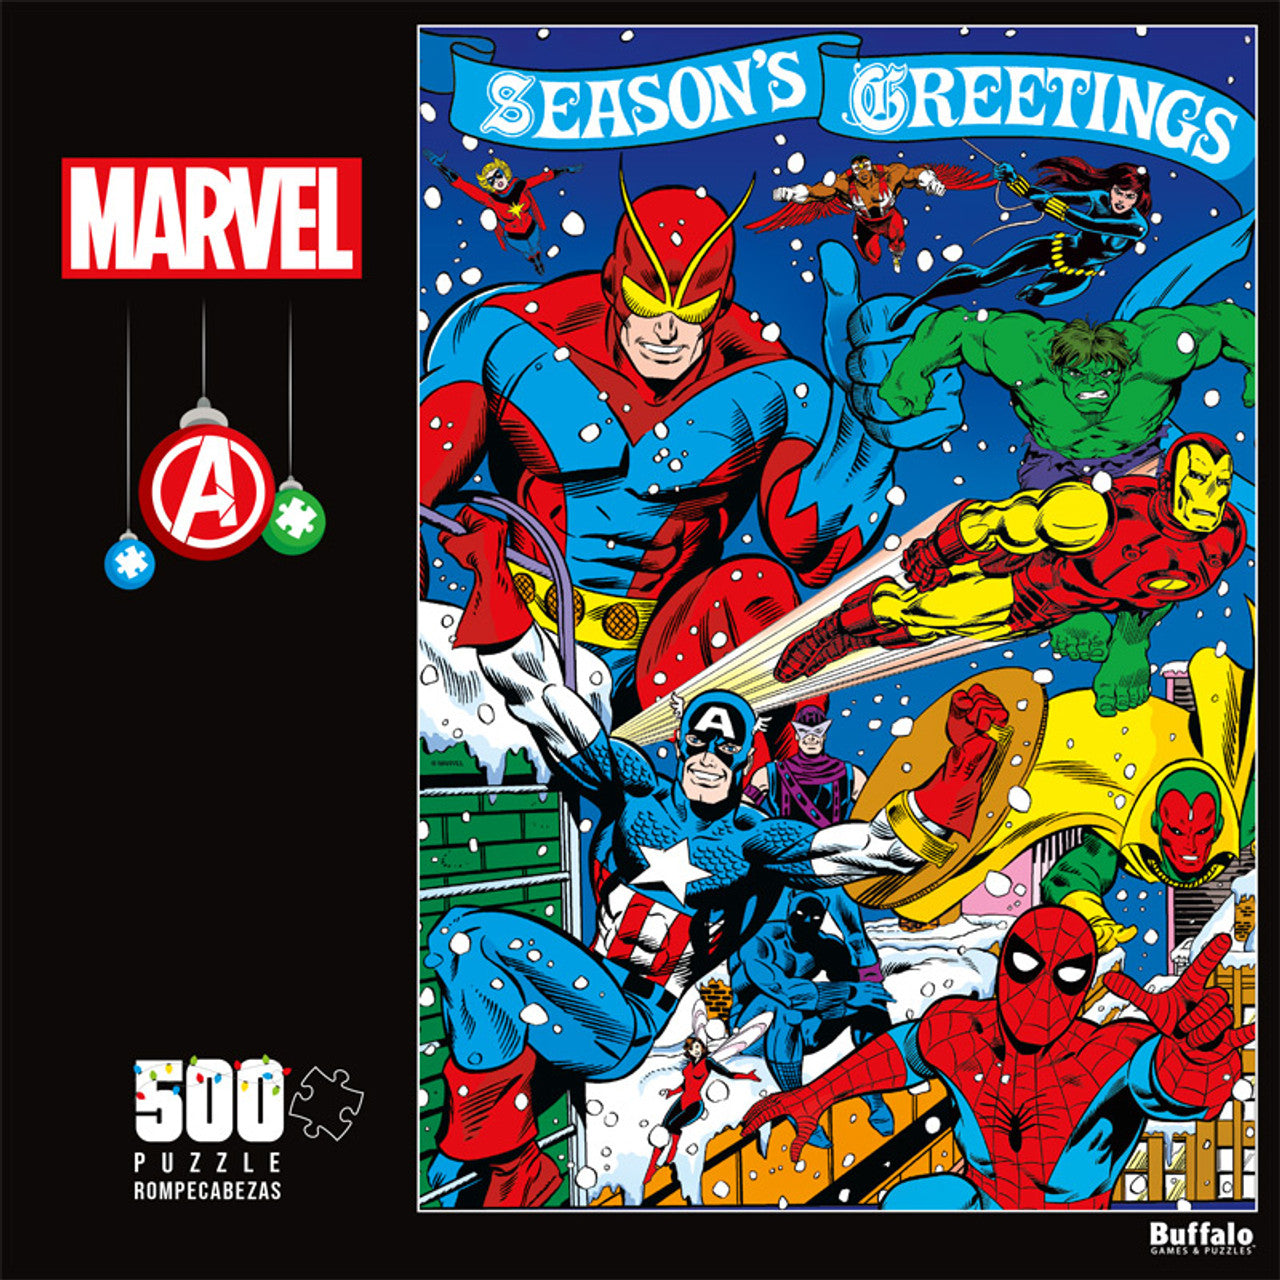 Marvel: Seasons Greetings from The Avengers - 500 Piece Puzzle